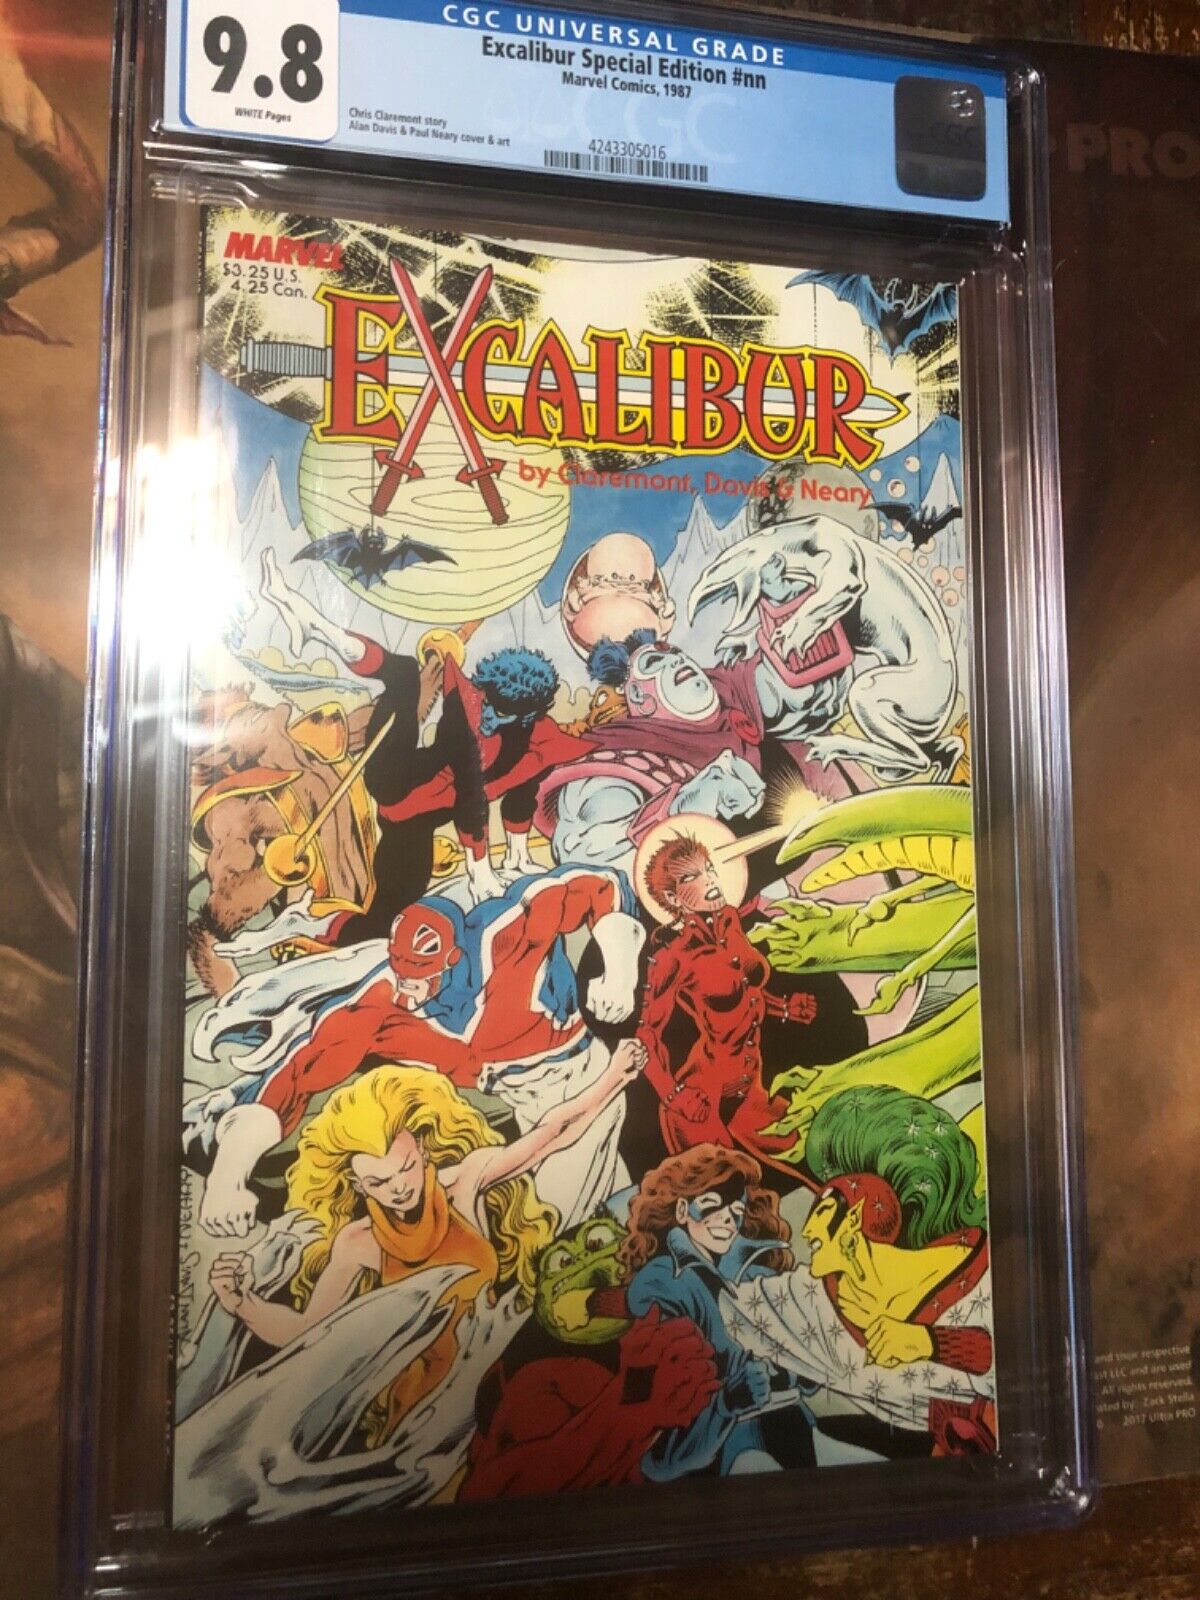 Excalibur Special Edition CGC 9.8 1st Appearance of Excalibur (1st Print)